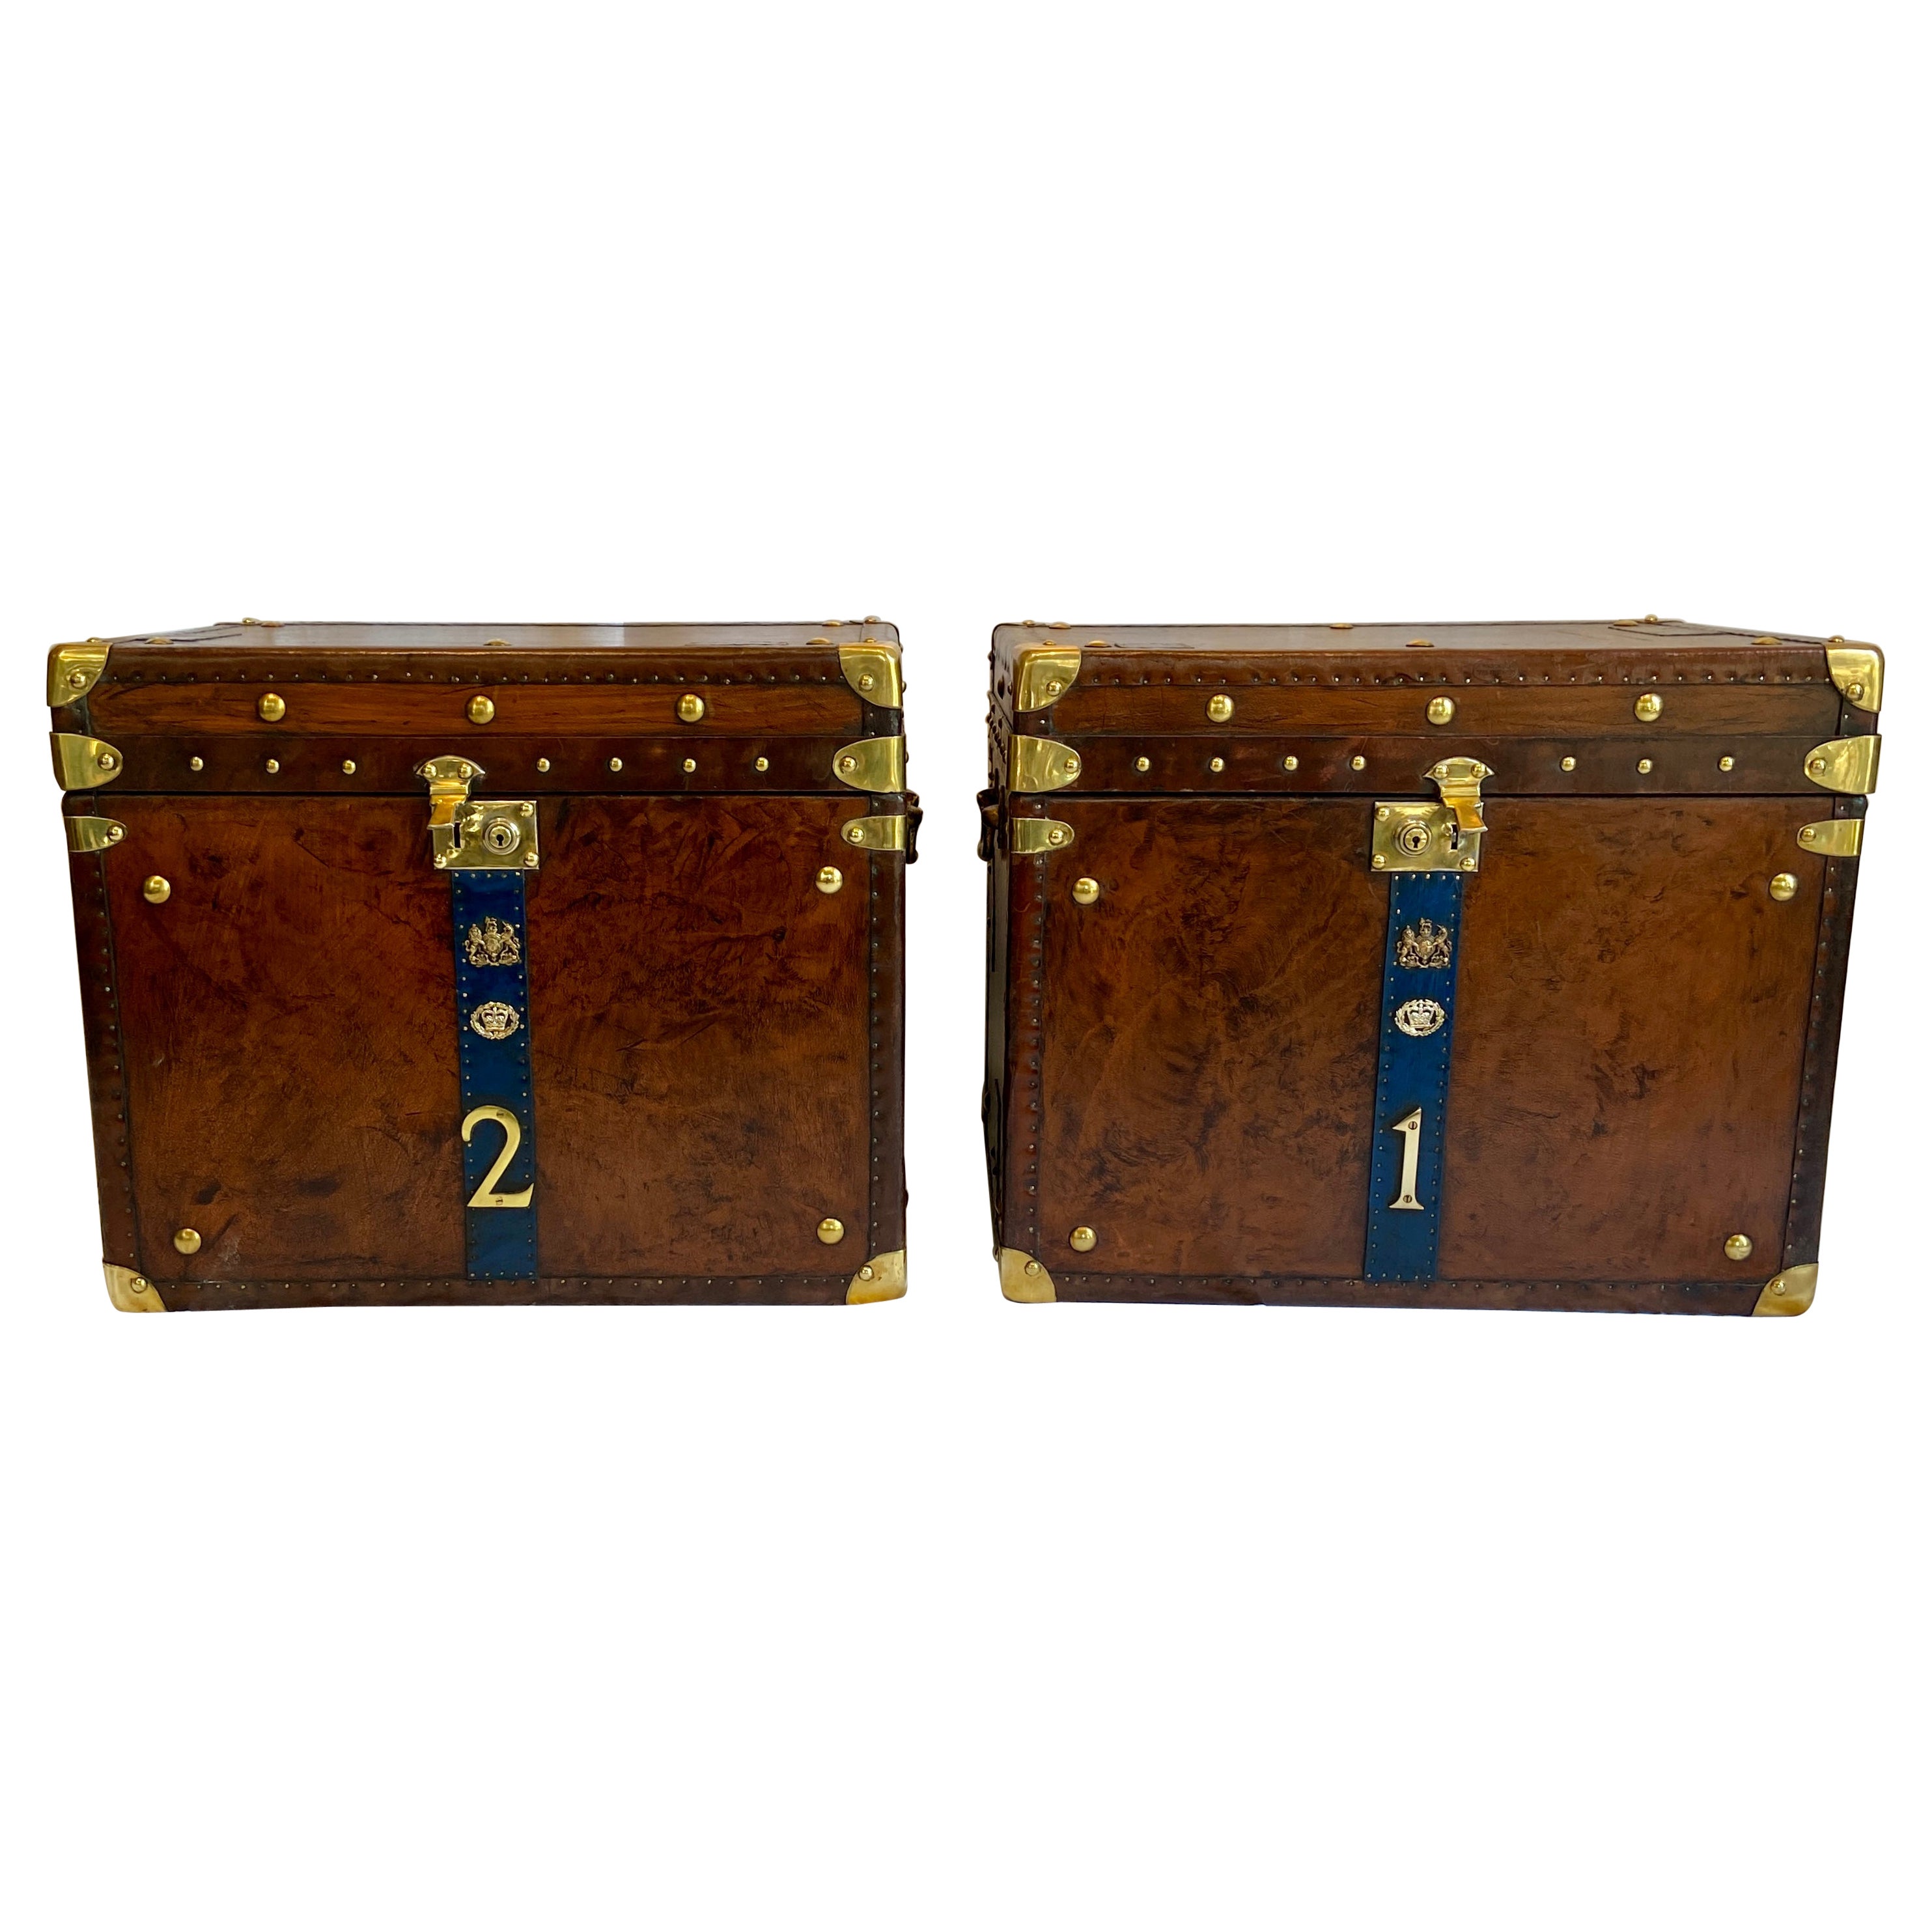 Pair Antique British Military Leather Chests with Insignia, circa 1920-1930